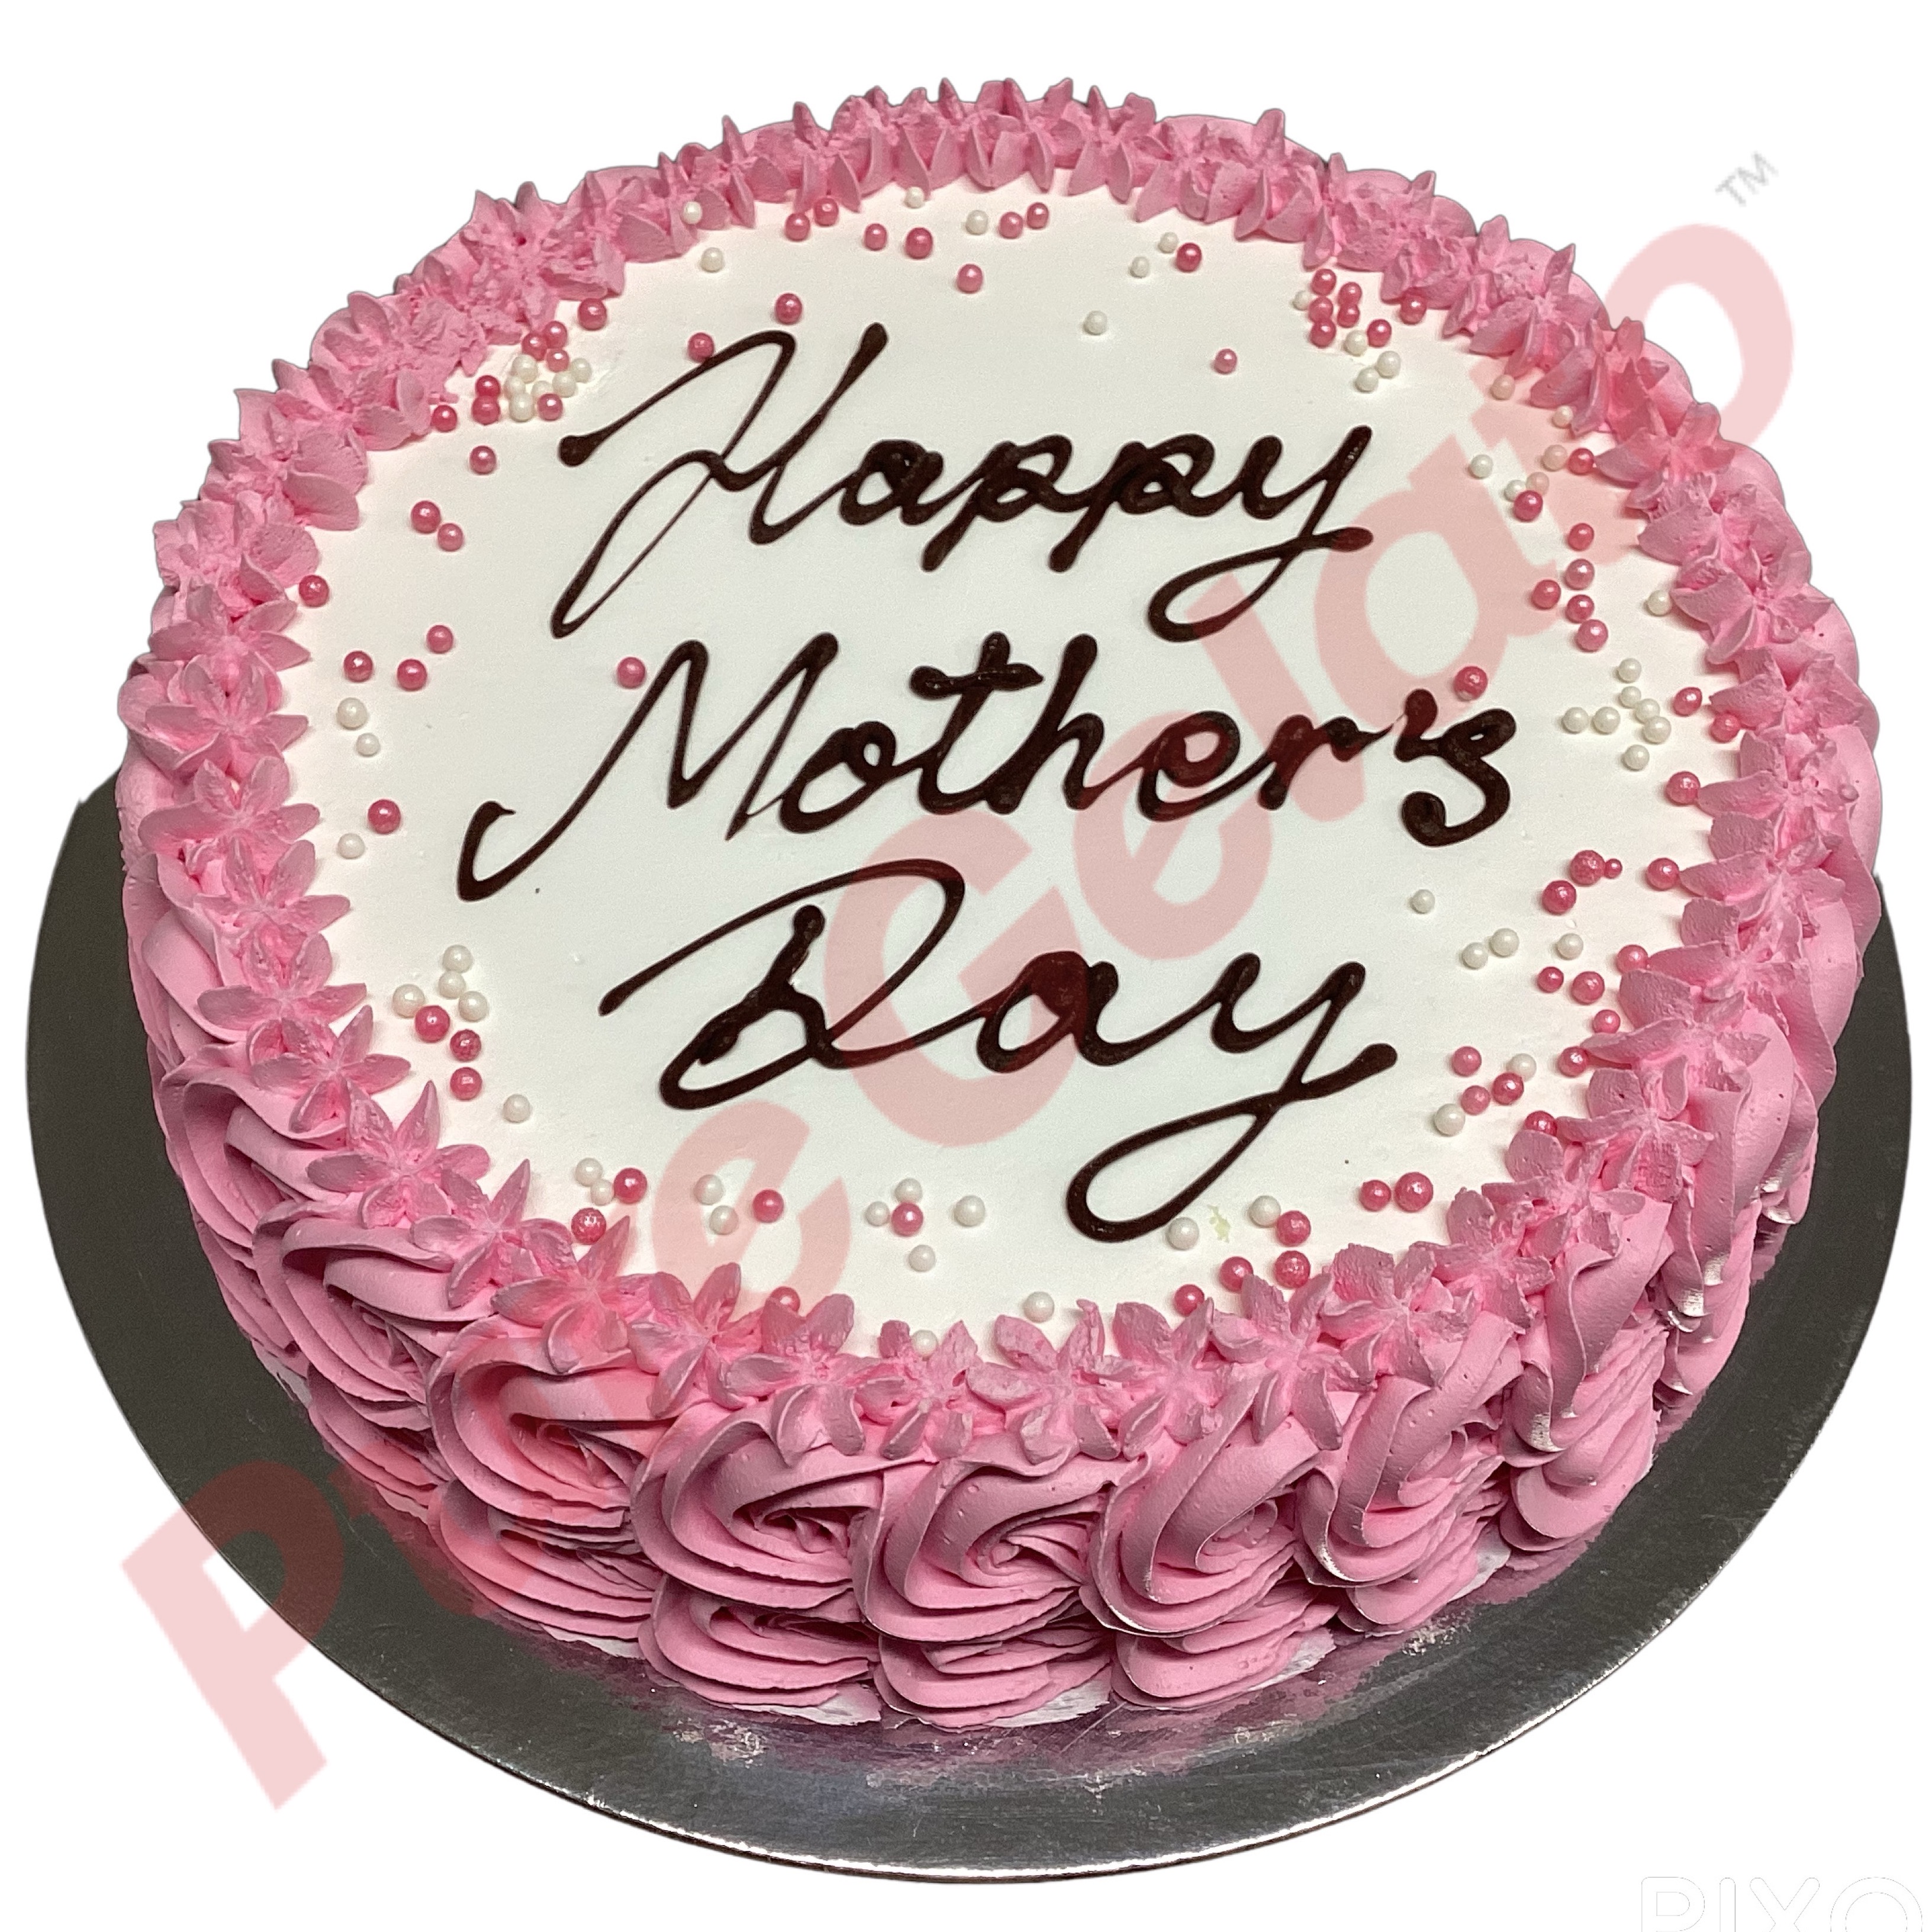 Mothers Day Cakes